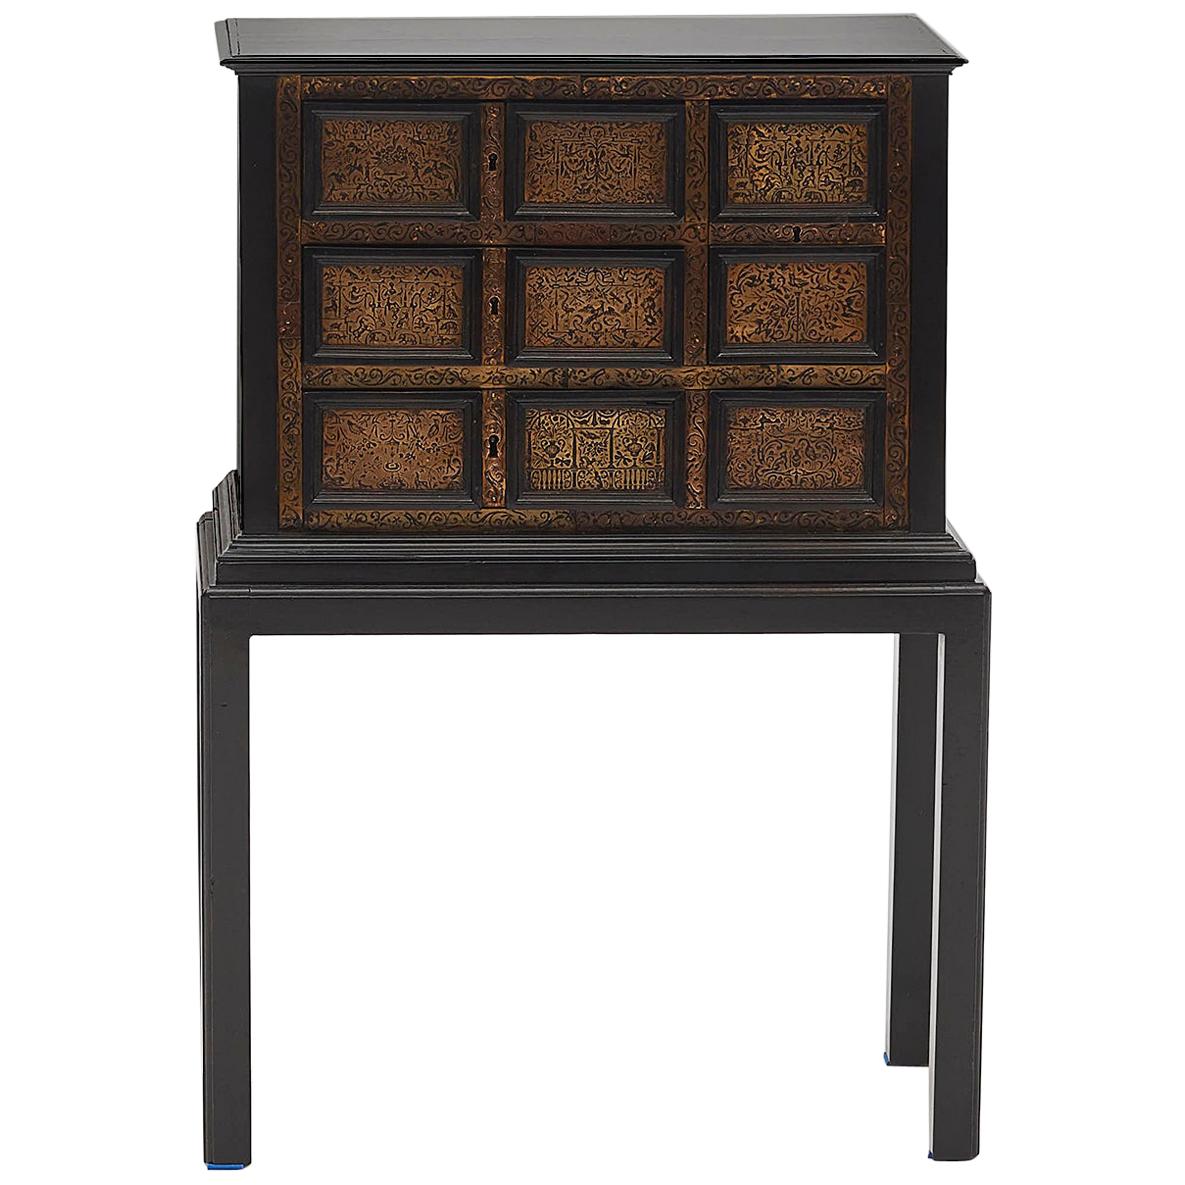 Small Elegant Baroque Cabinet in Ebonized Wood with Ornamented Brass Engravings